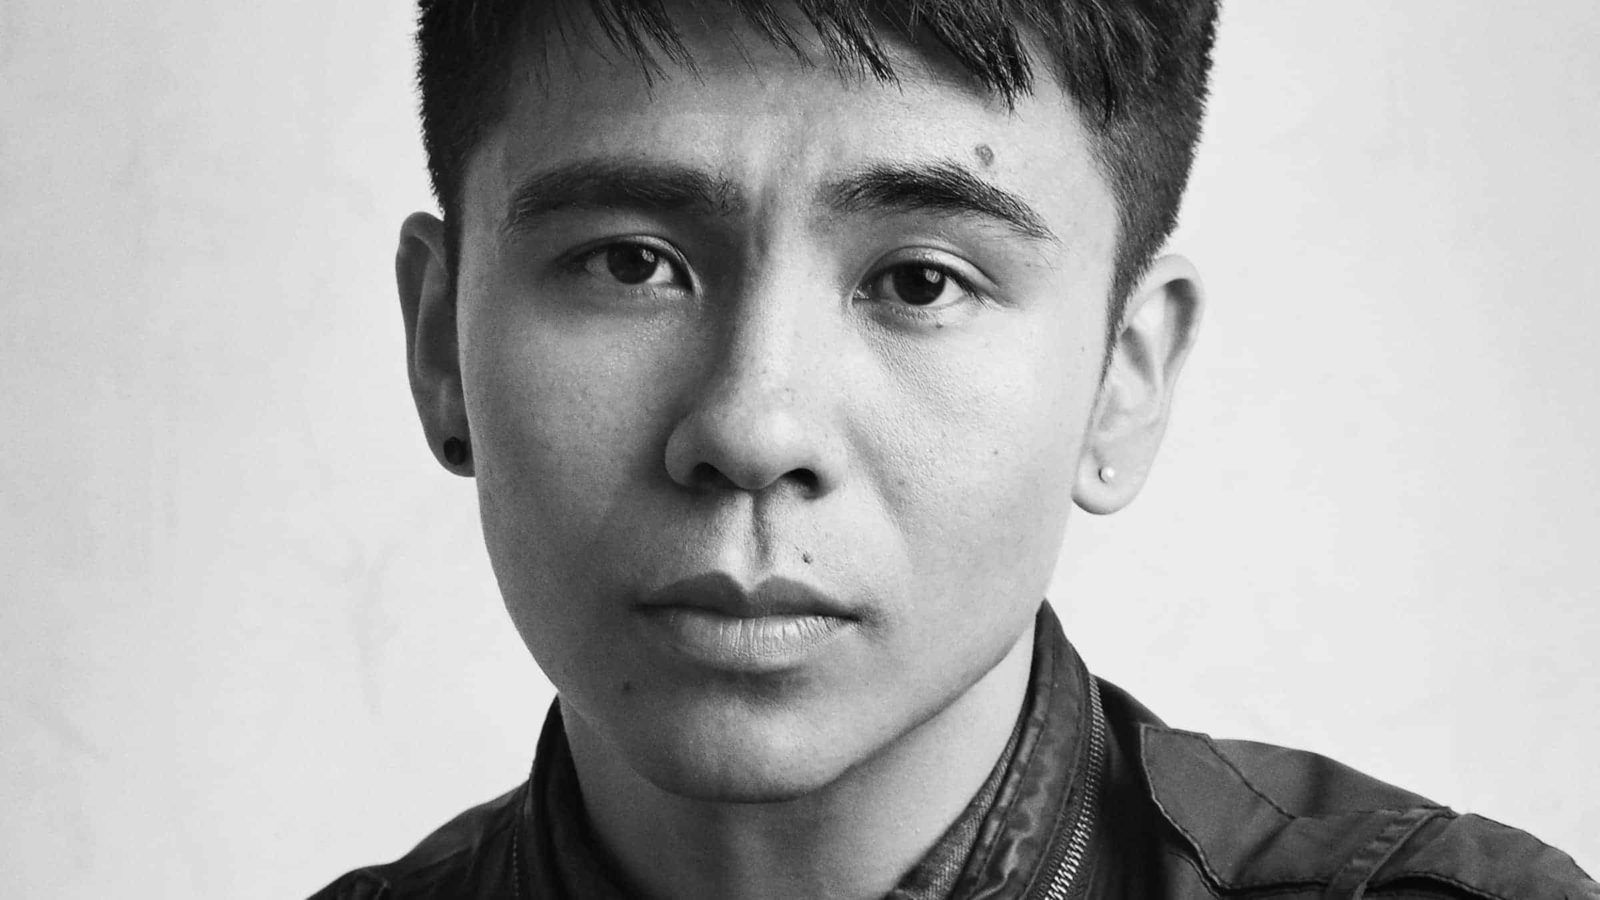 American poet Ocean Vuong reads his new work rooted in the U.S. and Viet Nam.